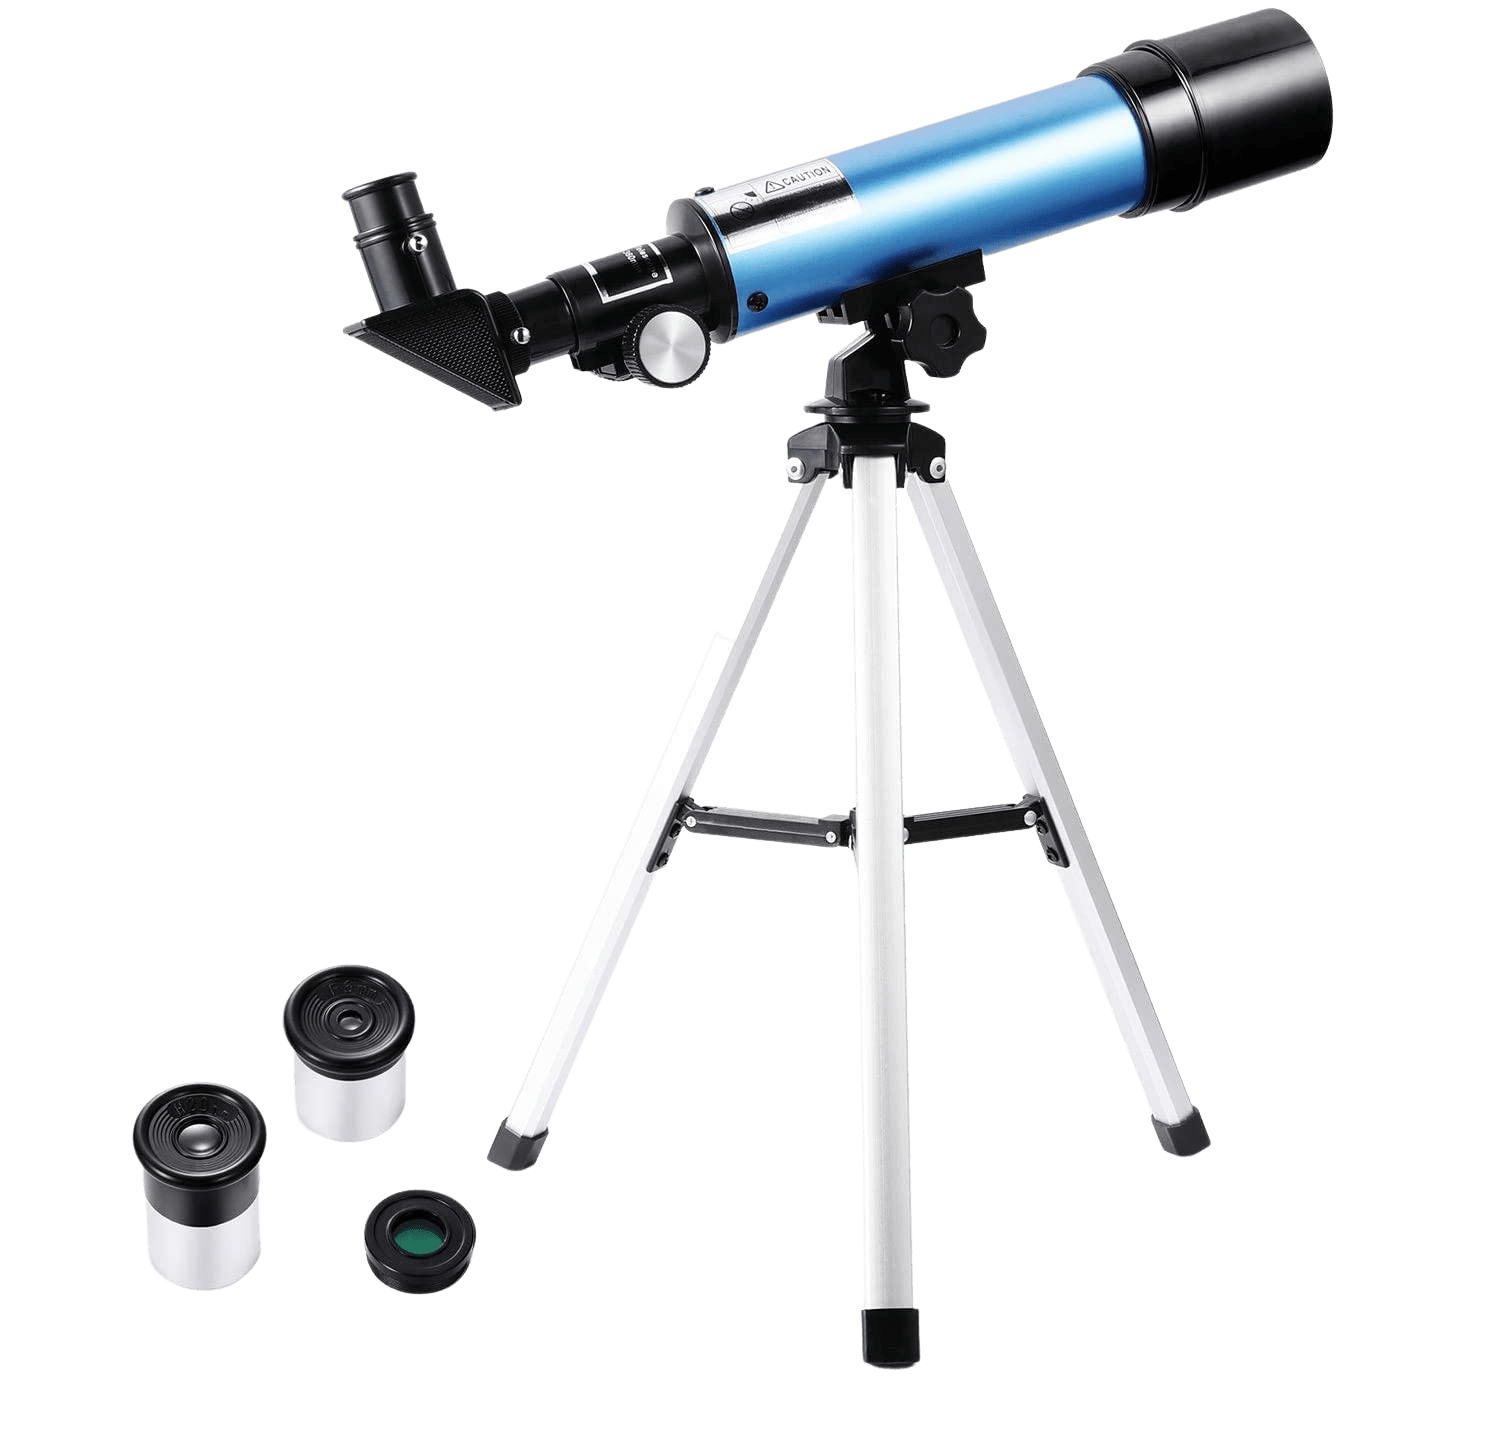 First Telescope for Kids &amp; Beginners, Portable Refractor Telescope 90x Magnification with Tabletop Tripod and Two Eyepieces - Best Gift for Kids to Explore Moon Space, View Wildlife, Watch Night-Sky | Decor Gifts and More